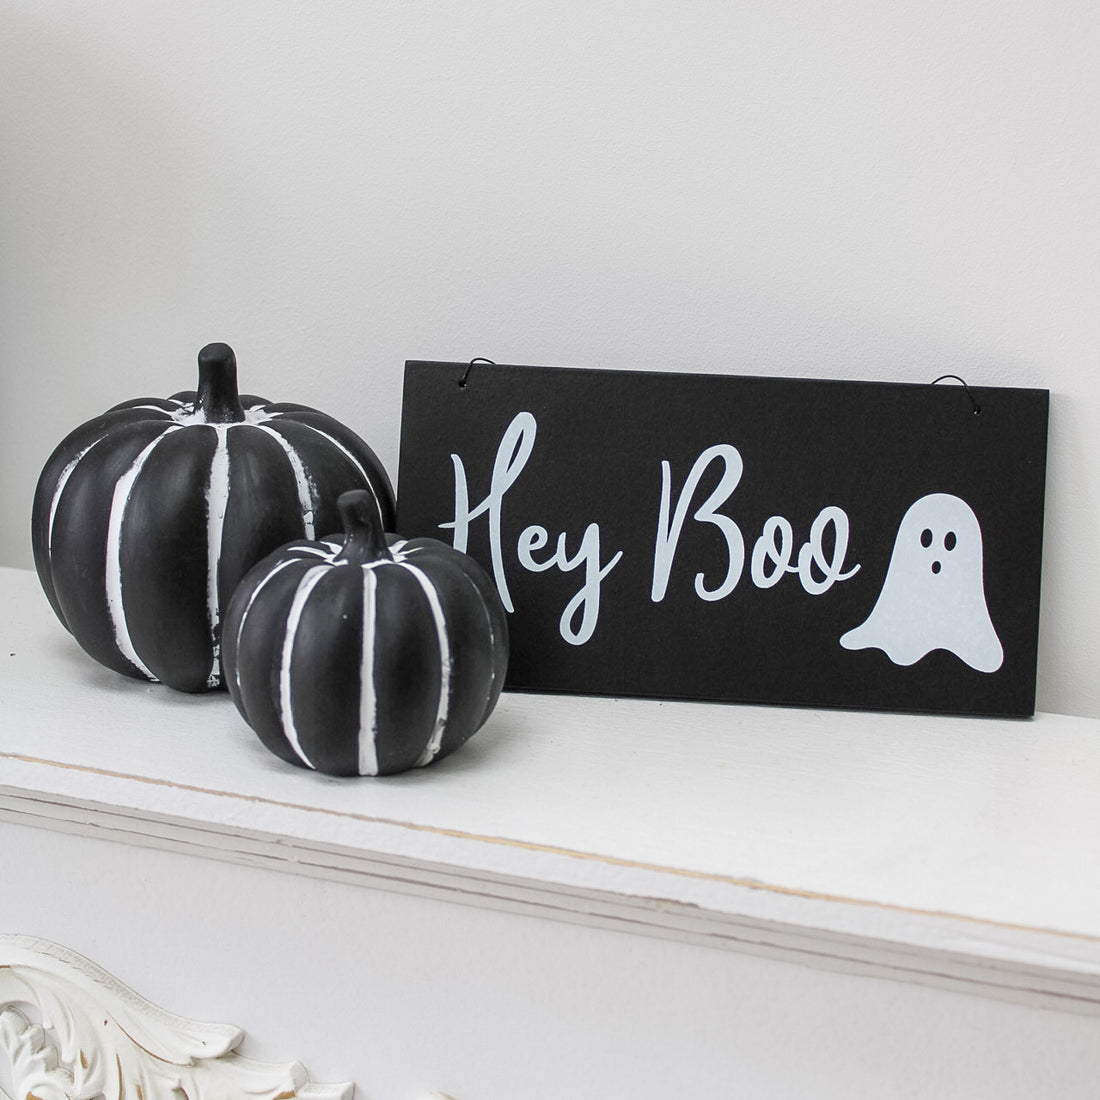 Hey Boo Black Wooden Hanging Sign